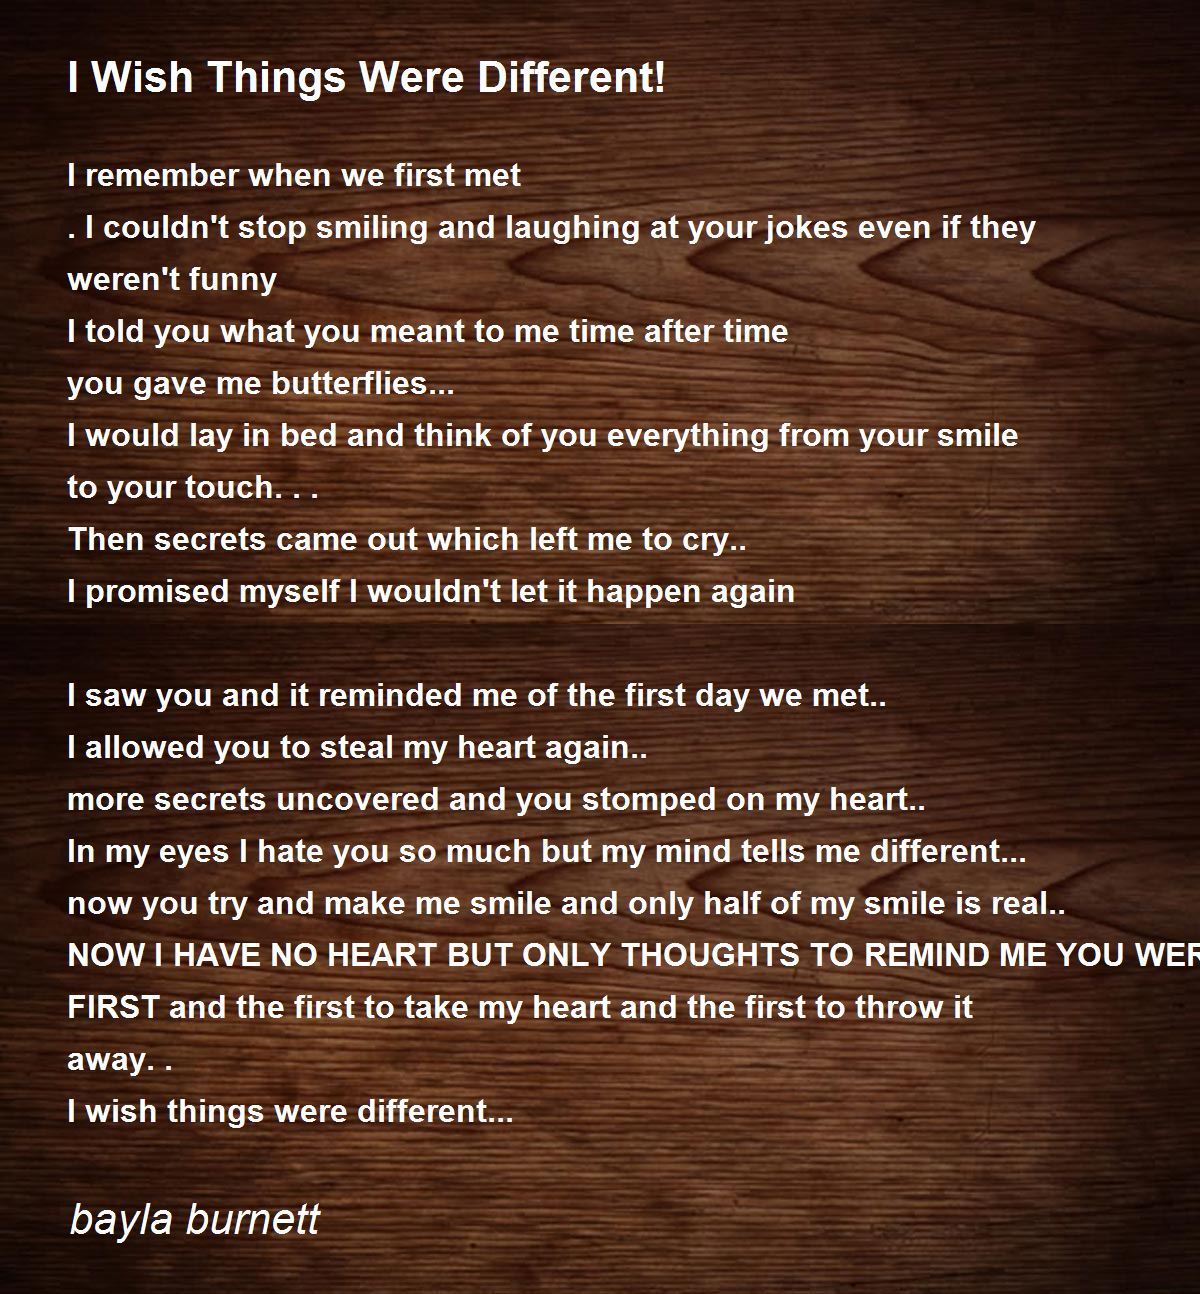 I Wish Things Were Different! - I Wish Things Were Different! Poem By Bayla Burnett